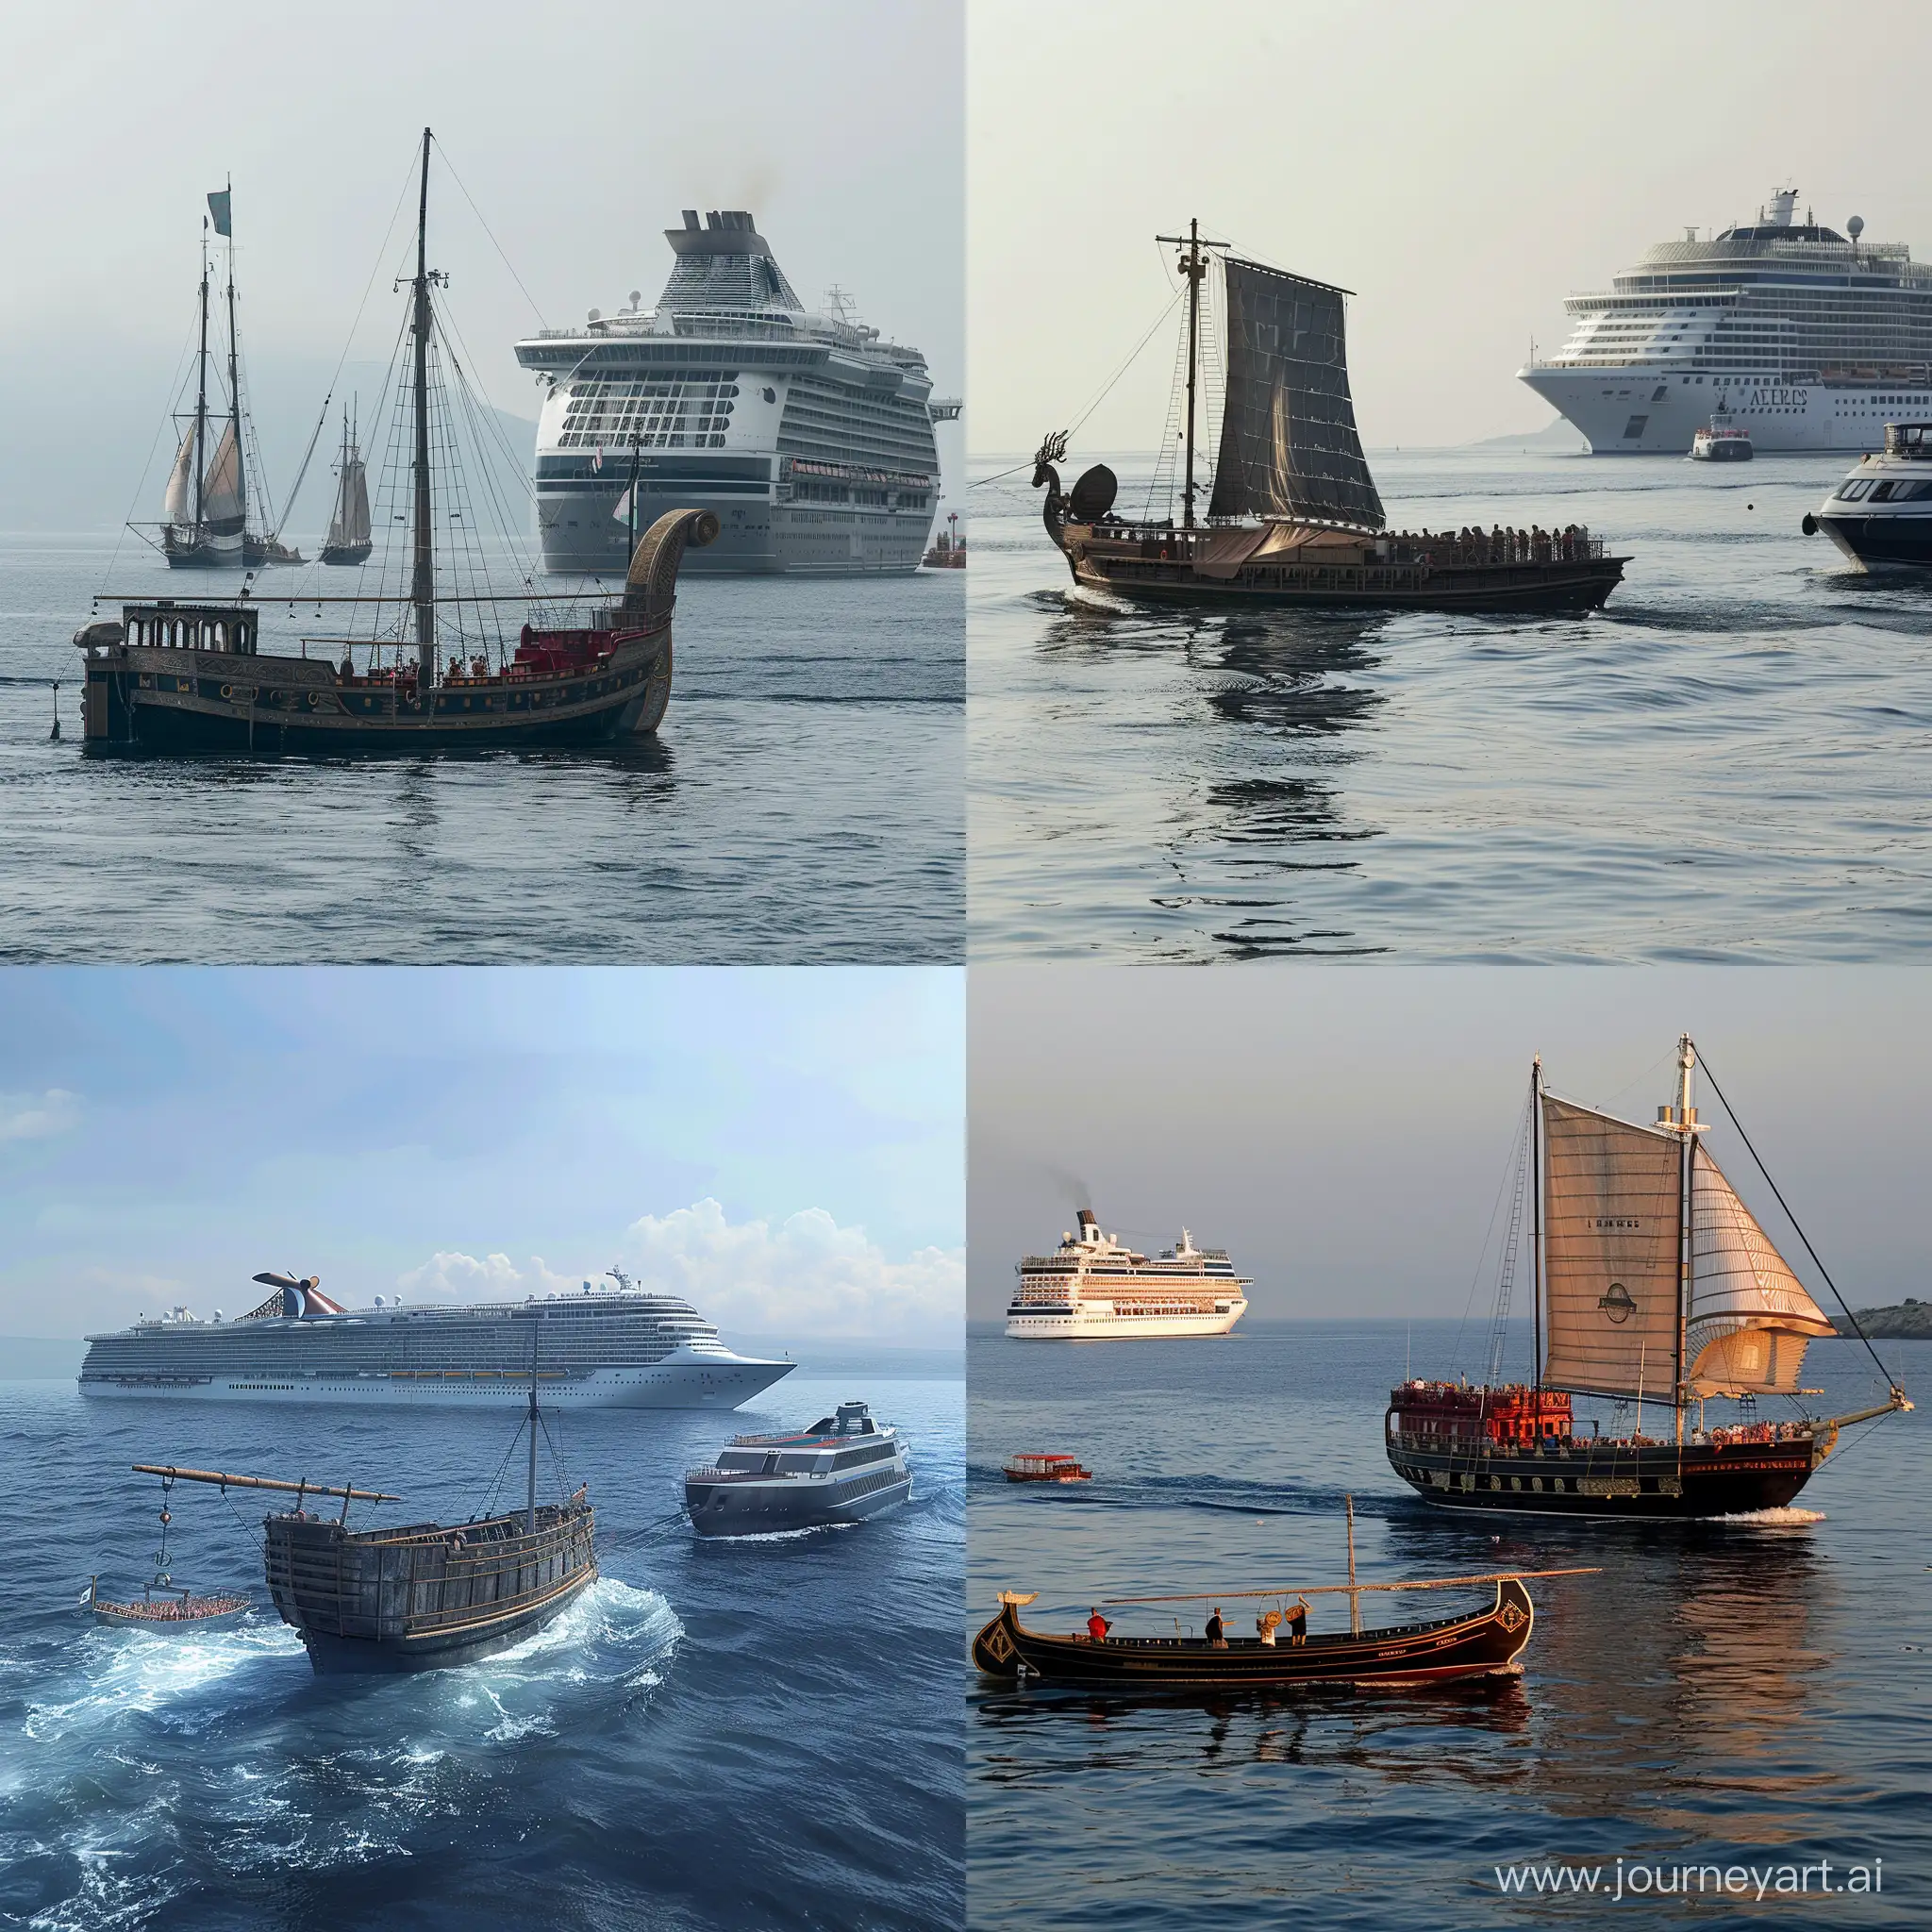 Ancient-Roman-Galley-and-Modern-Cruise-Liner-Sailing-Together